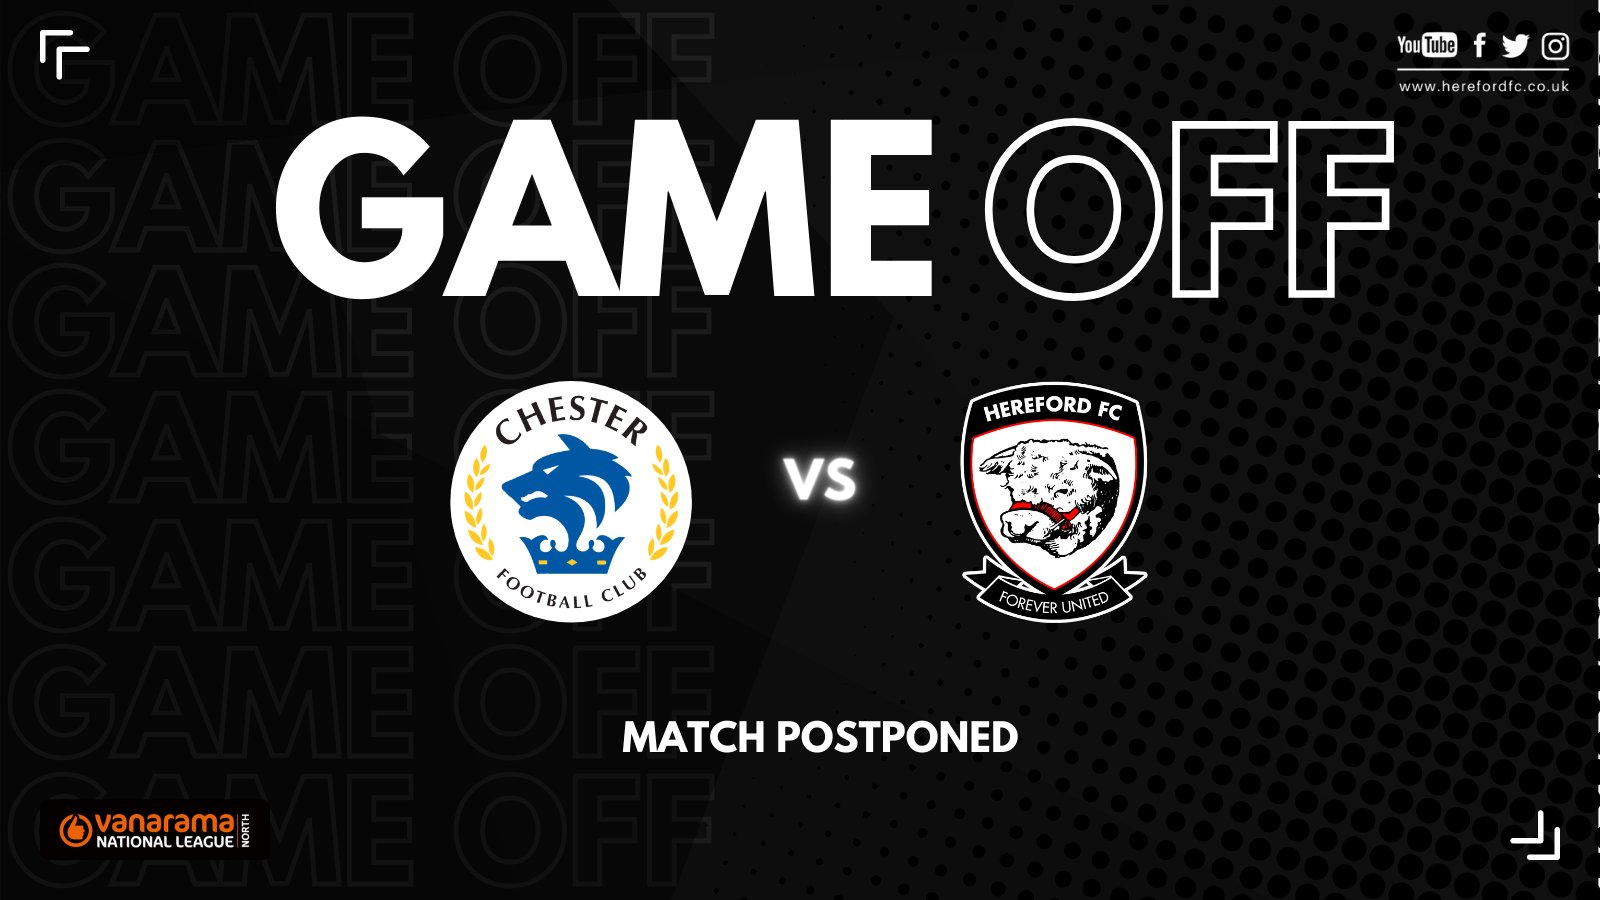 FOOTBALL | Hereford FC’s game at Chester is postponed after positive COVID-19 cases within Chester team